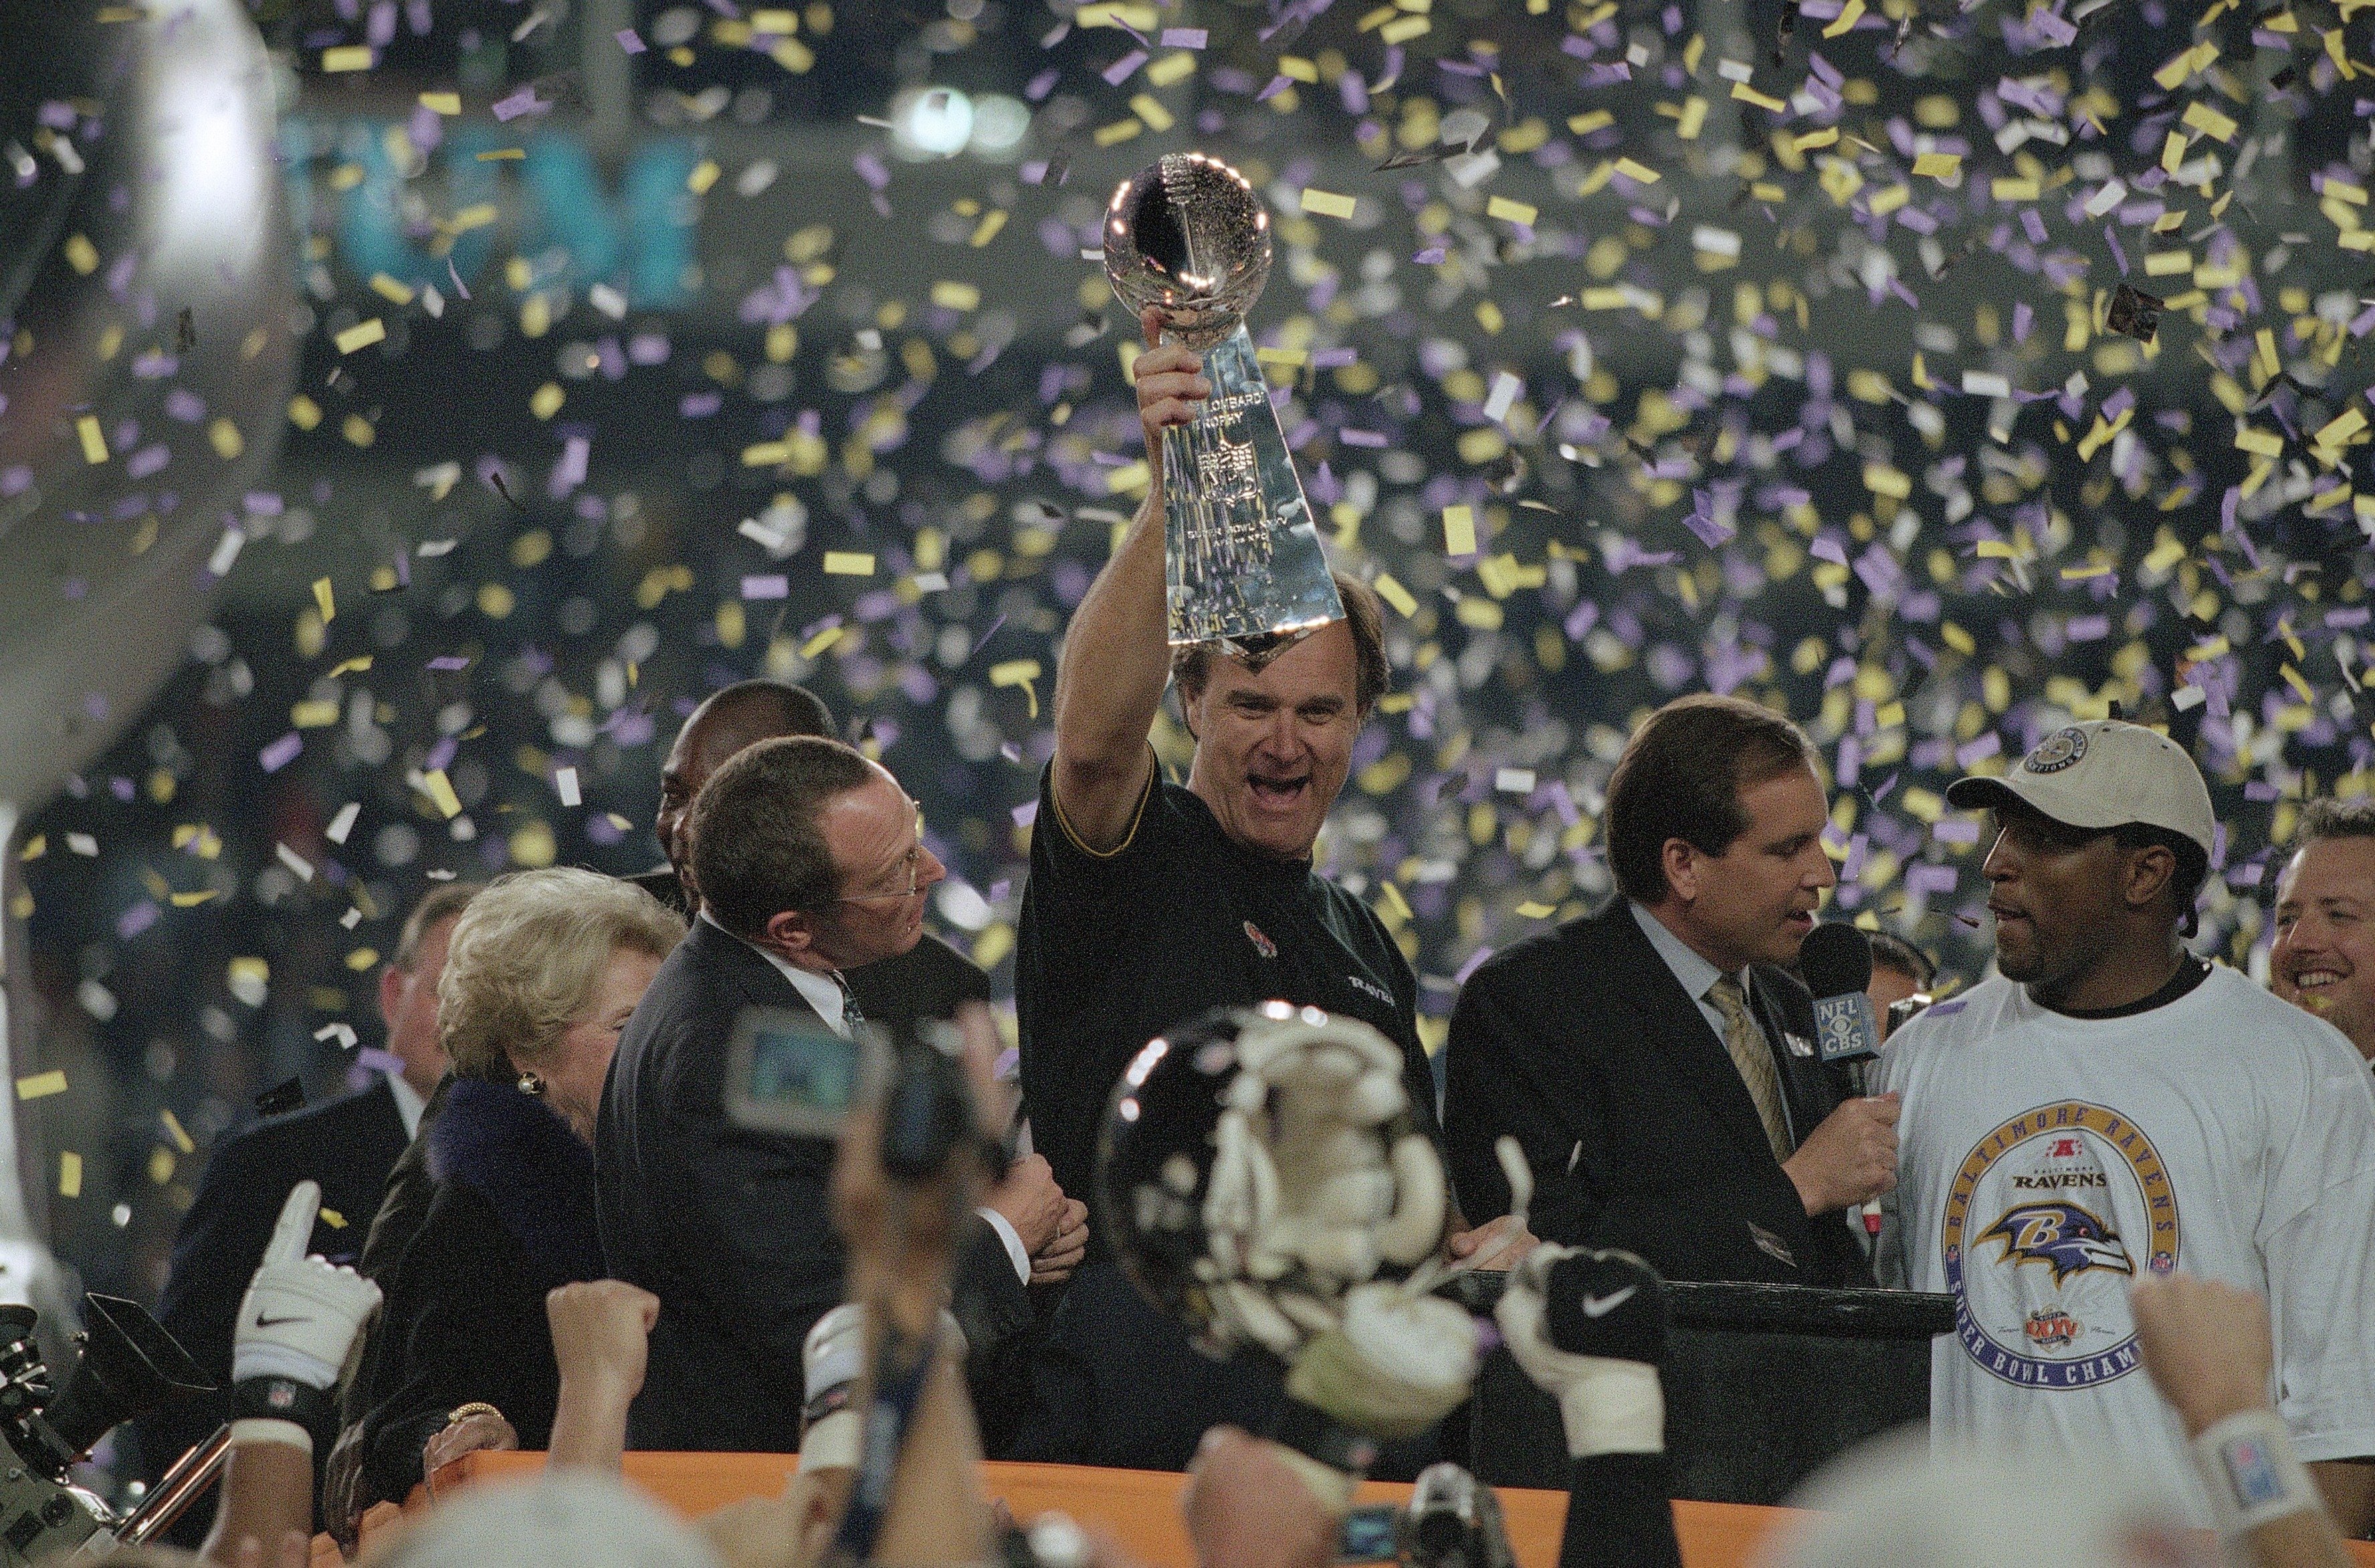 UNITED STATES - JANUARY 28: Football: Super Bowl XXXV, Baltimore Ravens coach Brian Billick victorious with Lombardi trophy after game vs New York Giants, Tampa, FL 1/28/2001 (Photo by Bob Rosato/Sports Illustrated/Getty Images) (SetNumber: X62359 TK4 R9 F32)